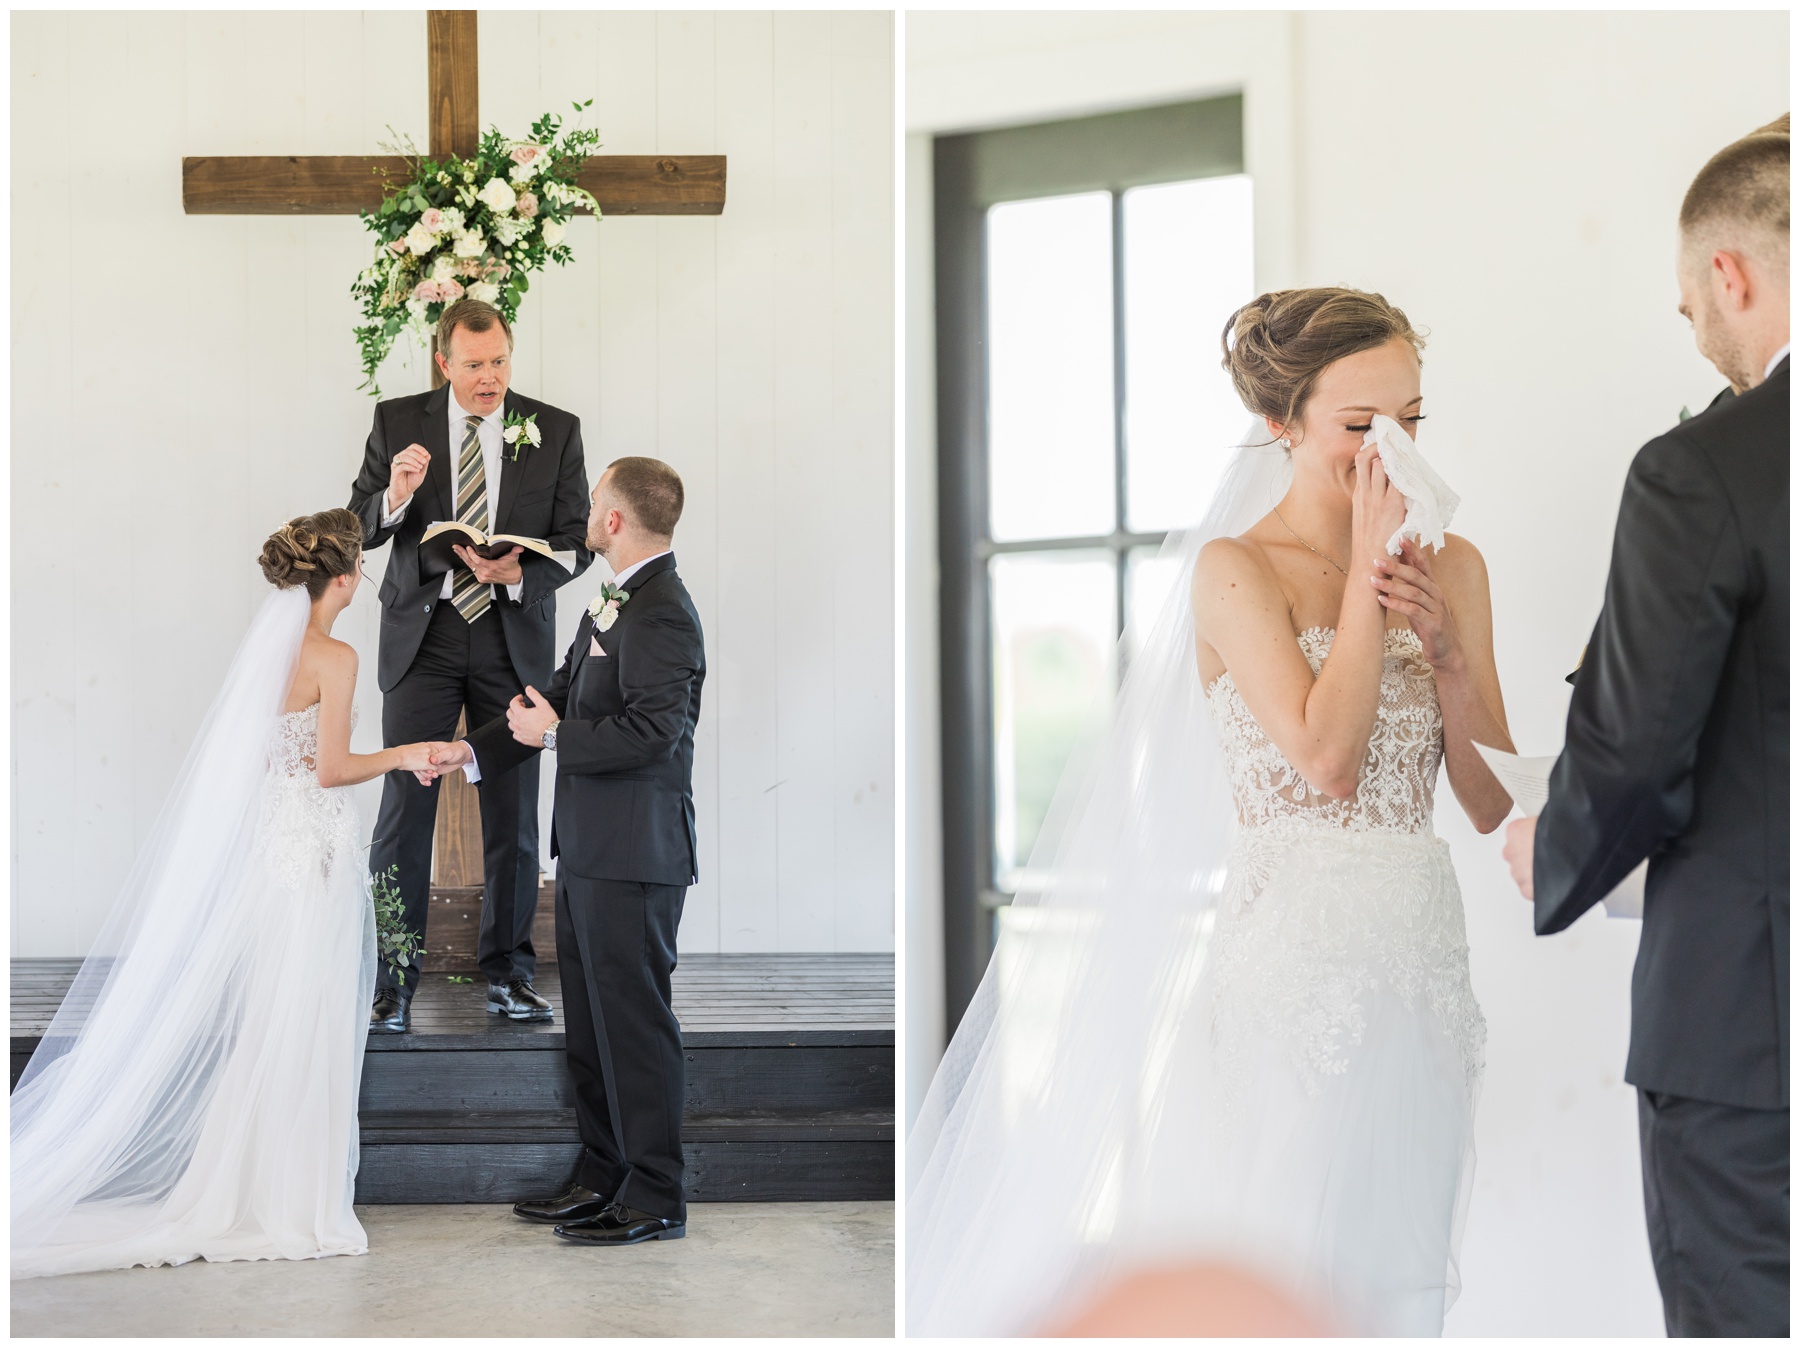 Wedding ceremony in the outdoor chapel at Willowynn Barn